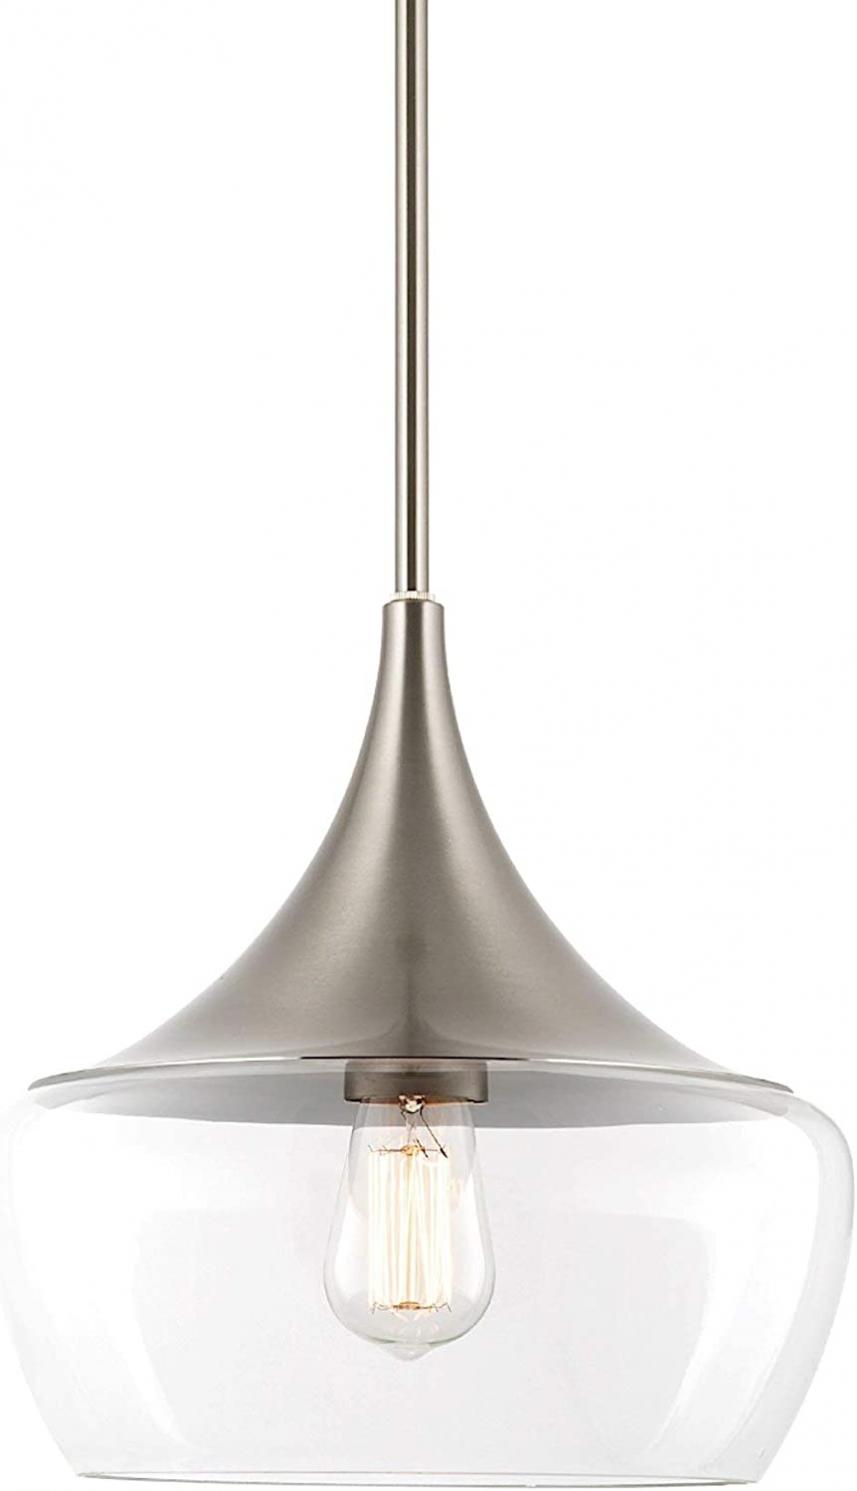 Kira Home Ava 12.5" Modern Industrial Schoolhouse Pendant Light with Clear Wine Glass Style Shade, Adjustable Hanging Height, Brushed Nickel Finish